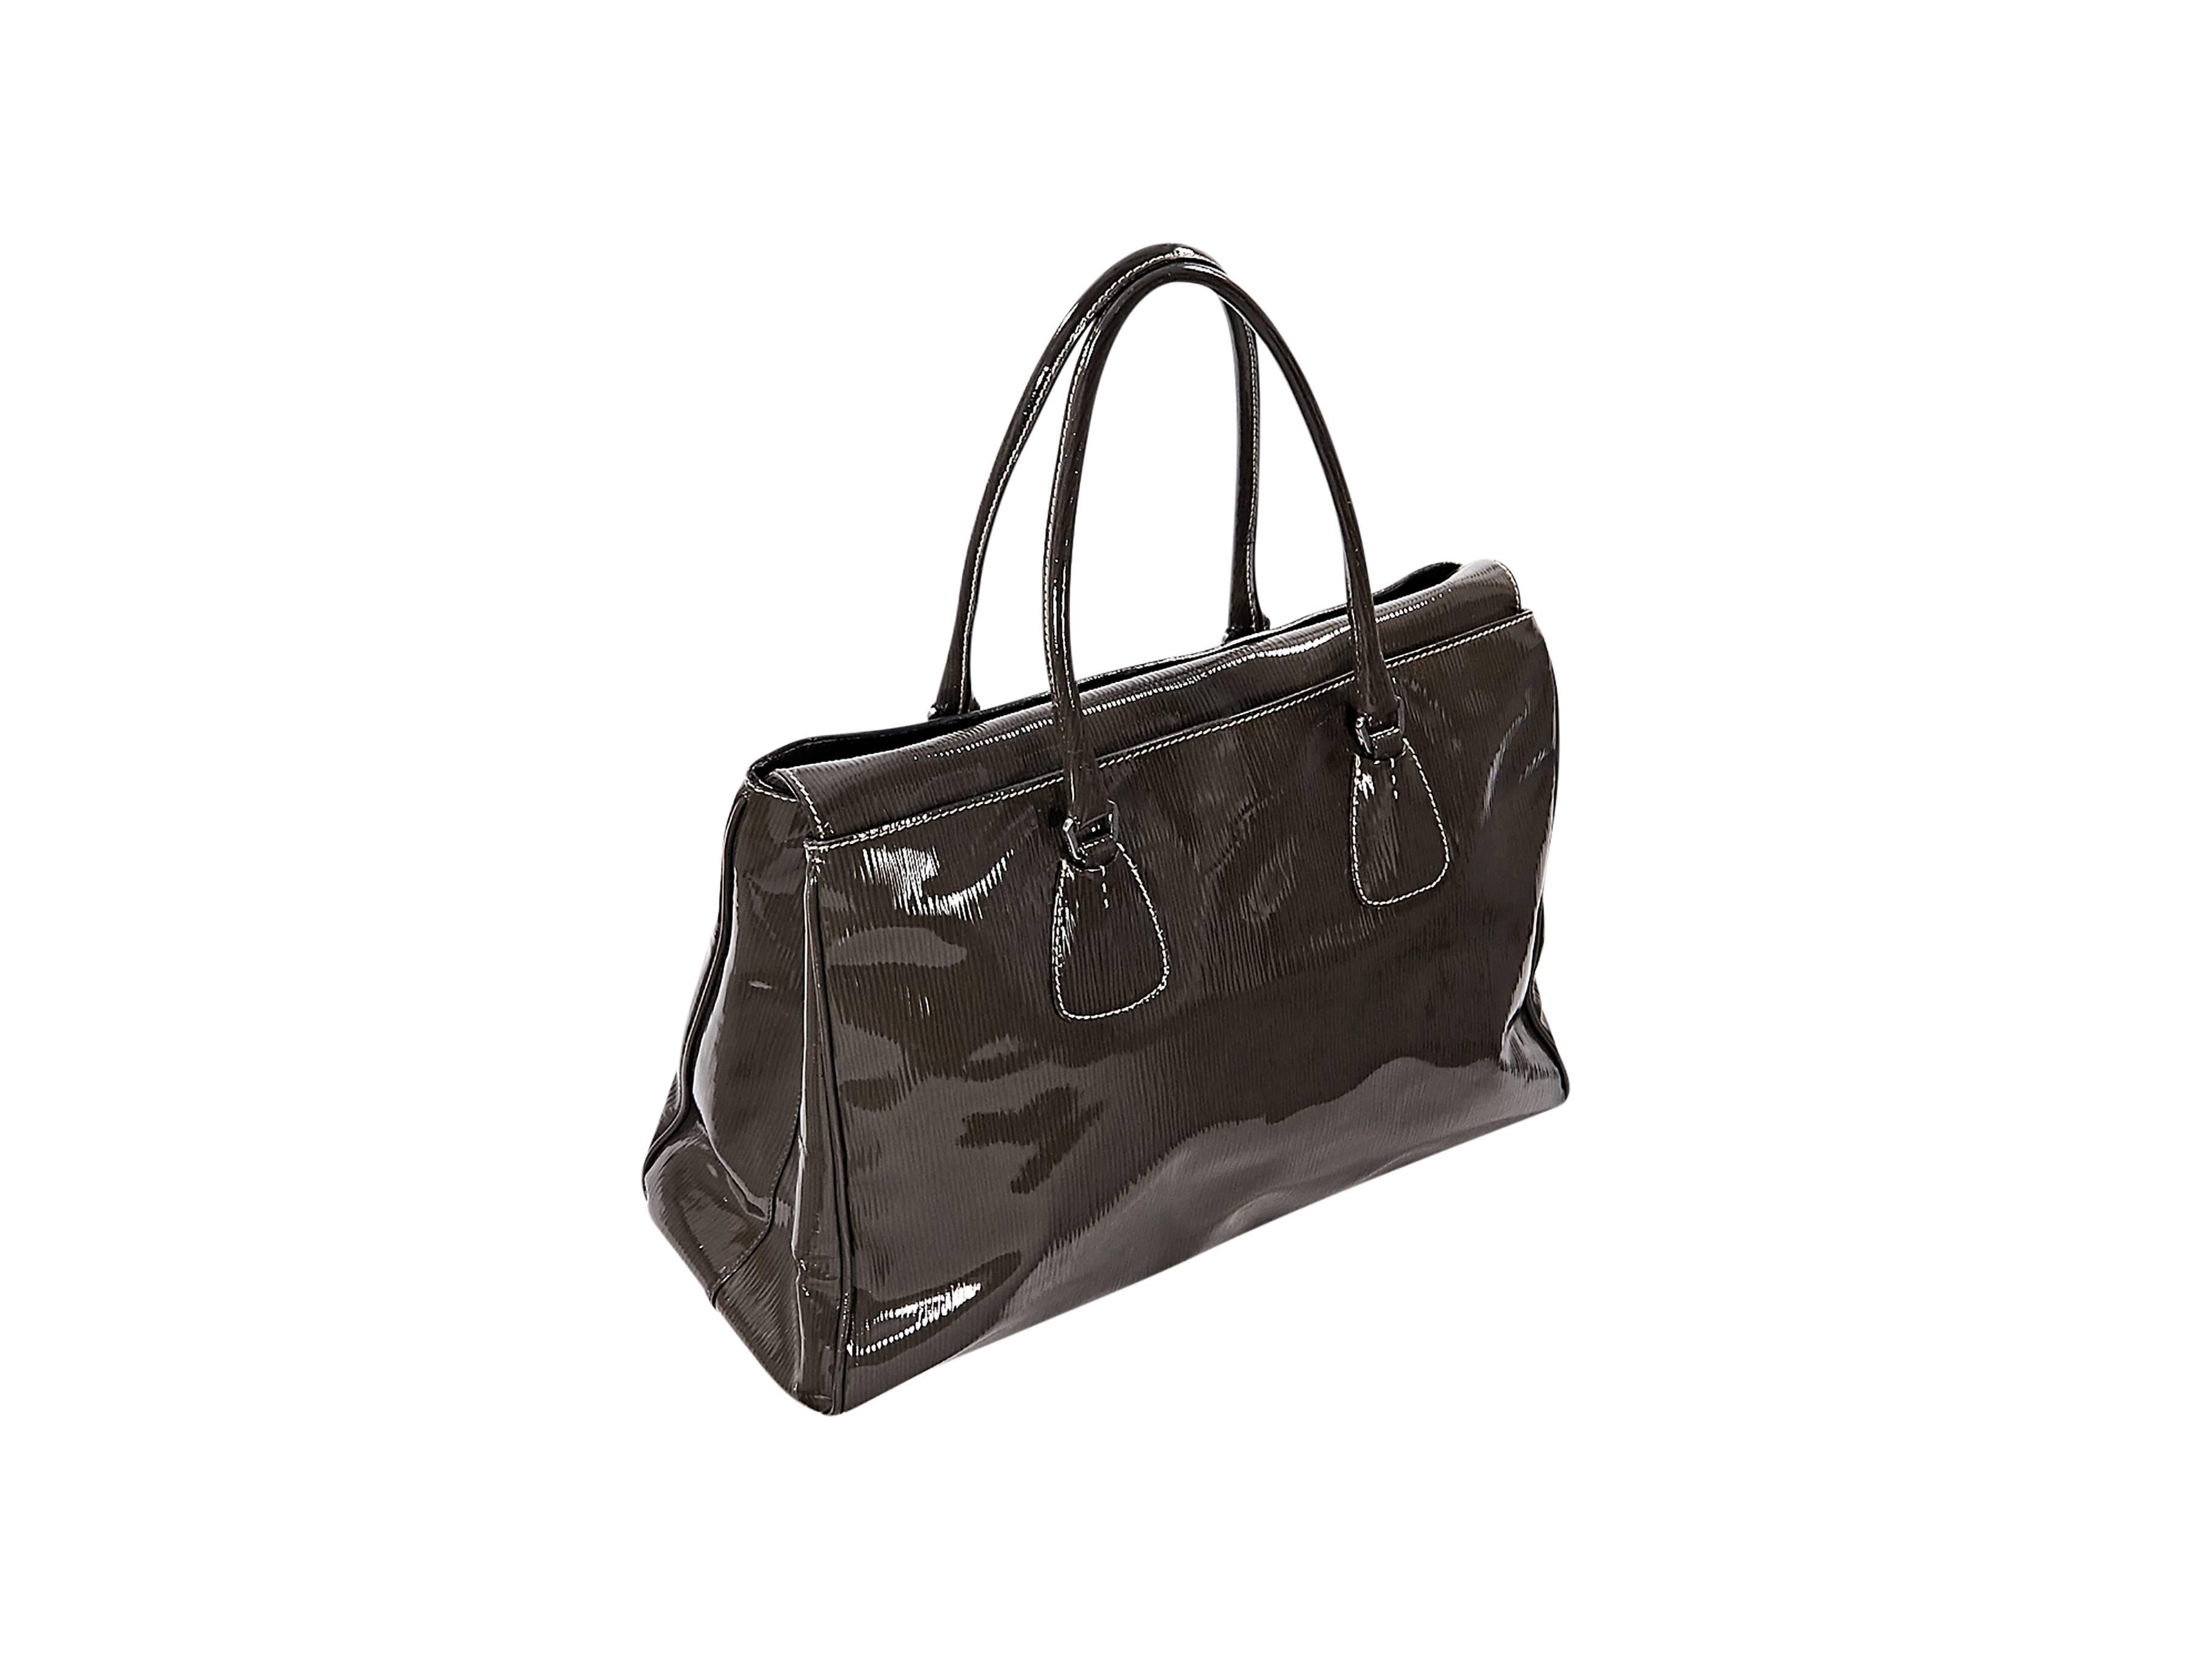 Product details:  Olive patent leather tote bag by Prada.  Dual shoulder straps.  Top magnetic snap tab closure.  Lined interior with center magnetic snap pocket.  Protective metal feet.  Silvertone hardware.  17